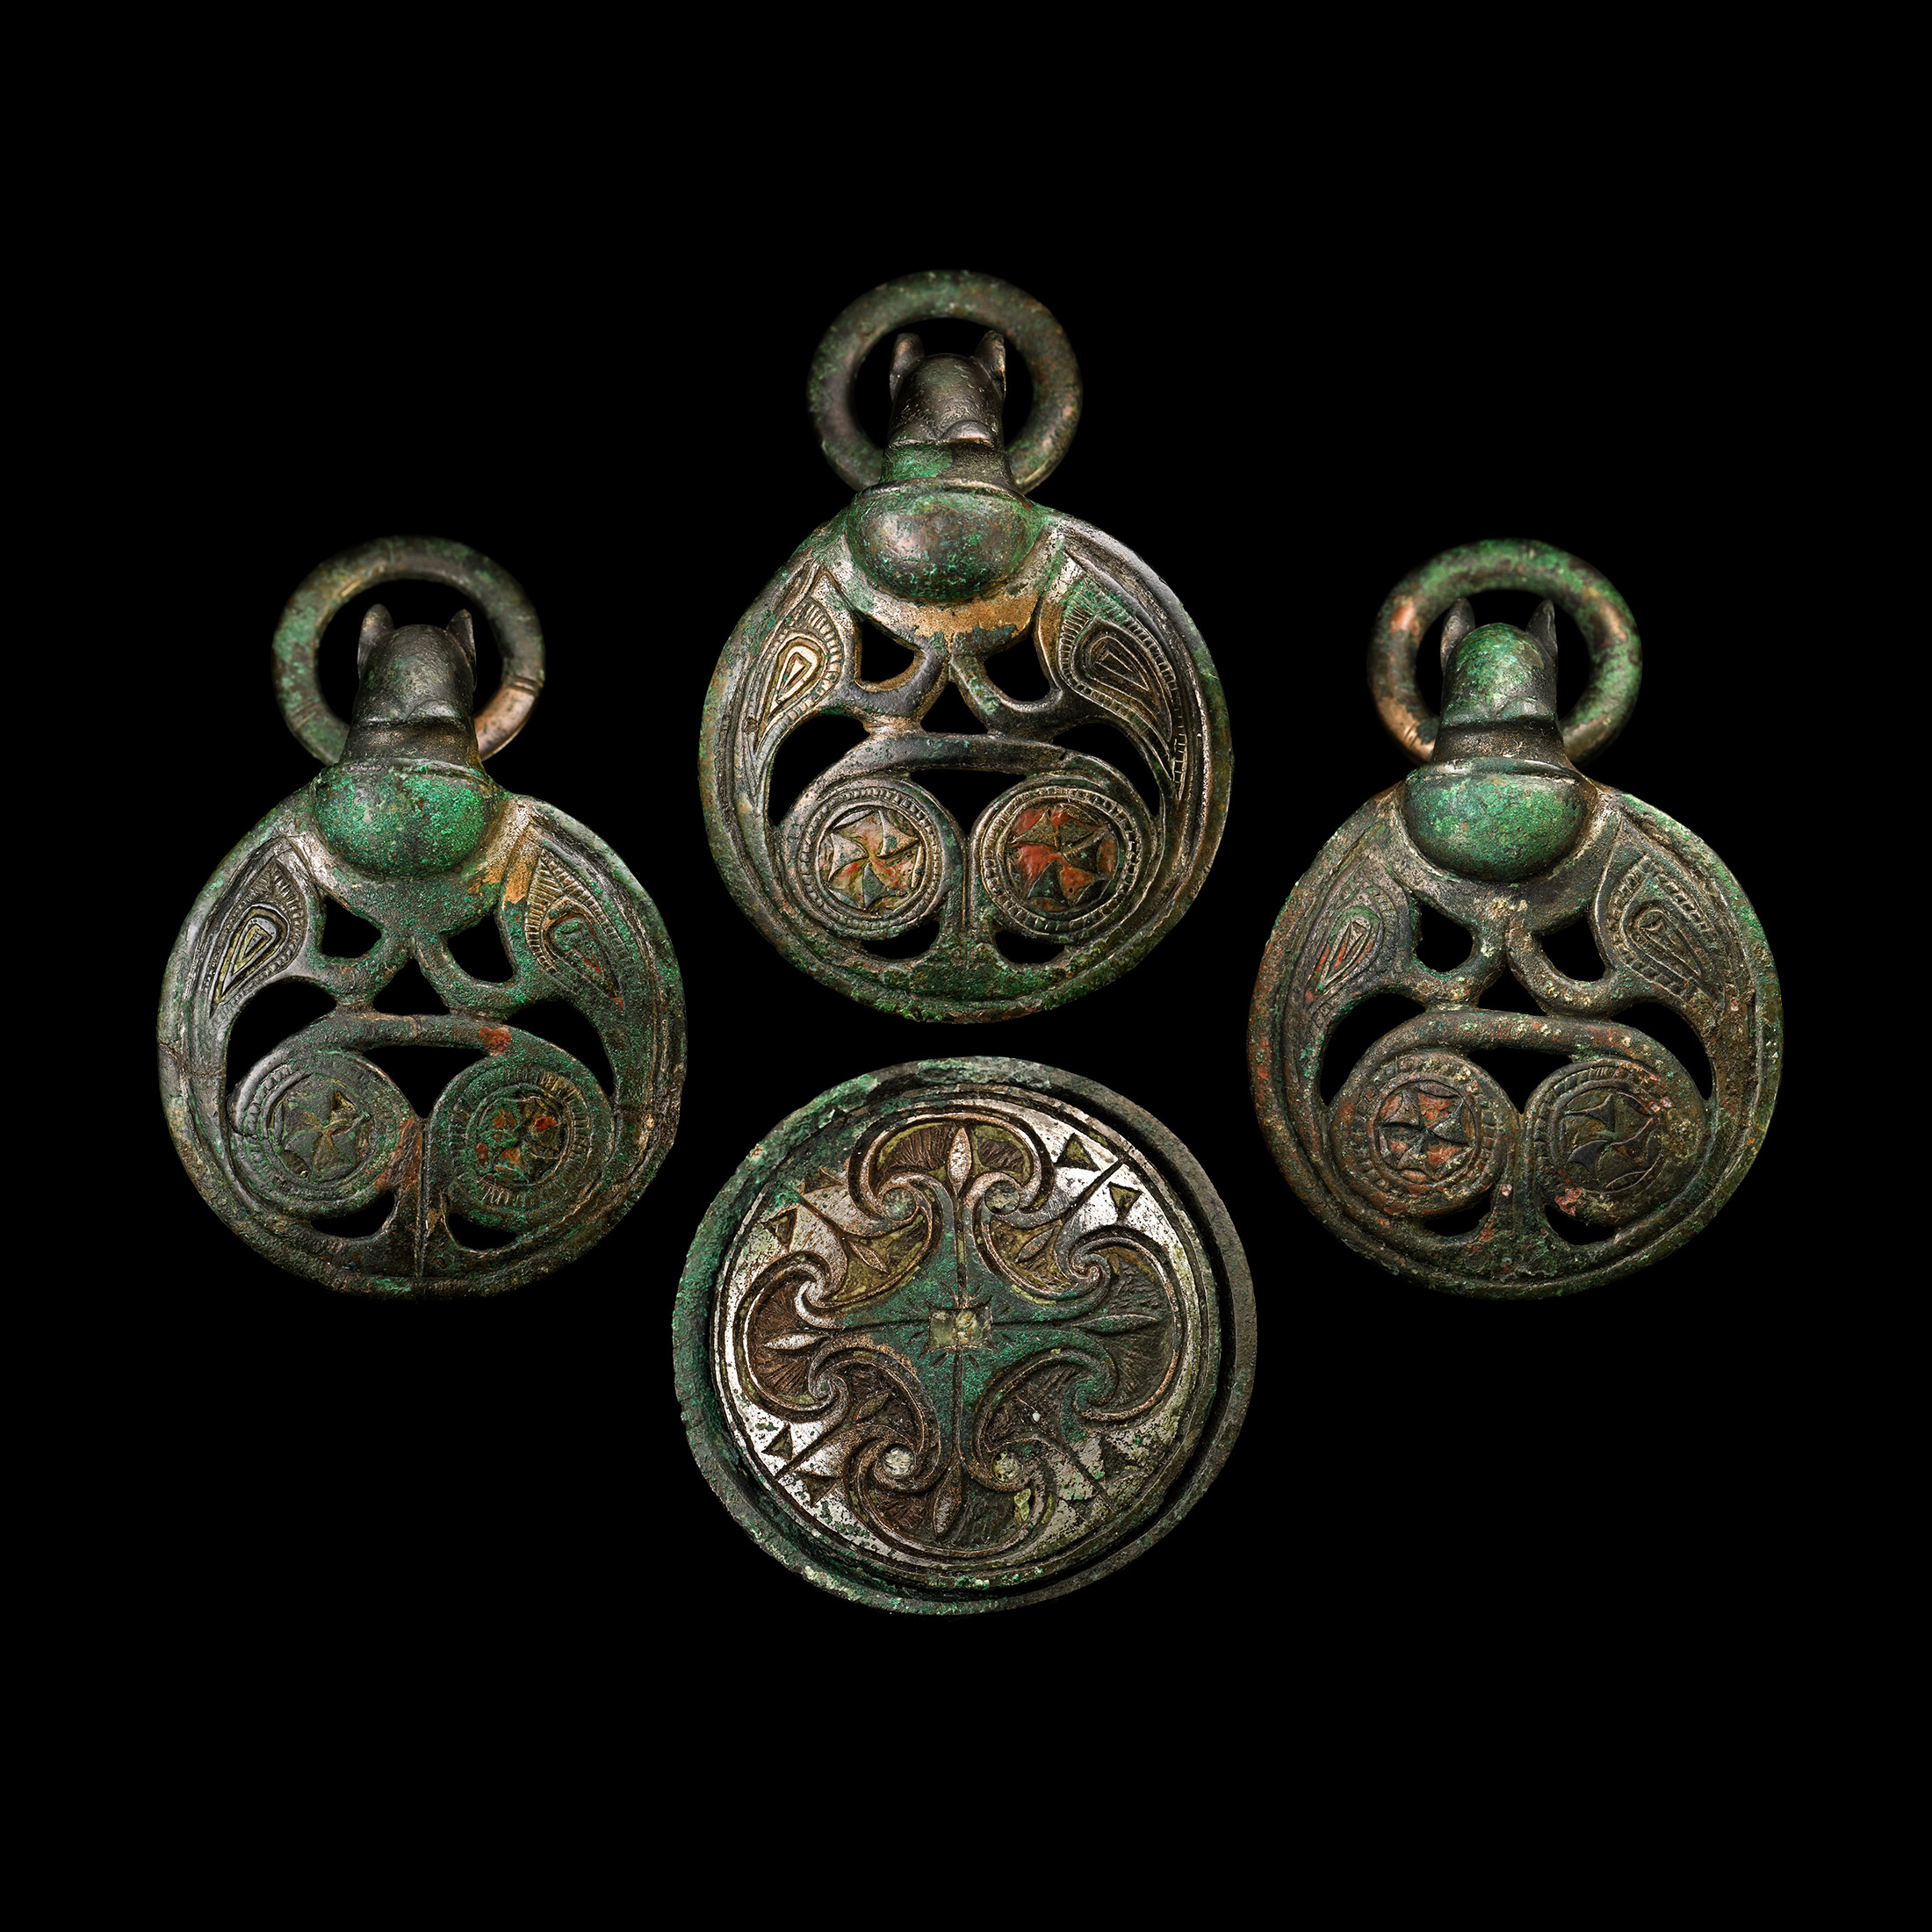 'The Scotch Corner' Anglo-Saxon Hanging Bowl Mounts and Bowl